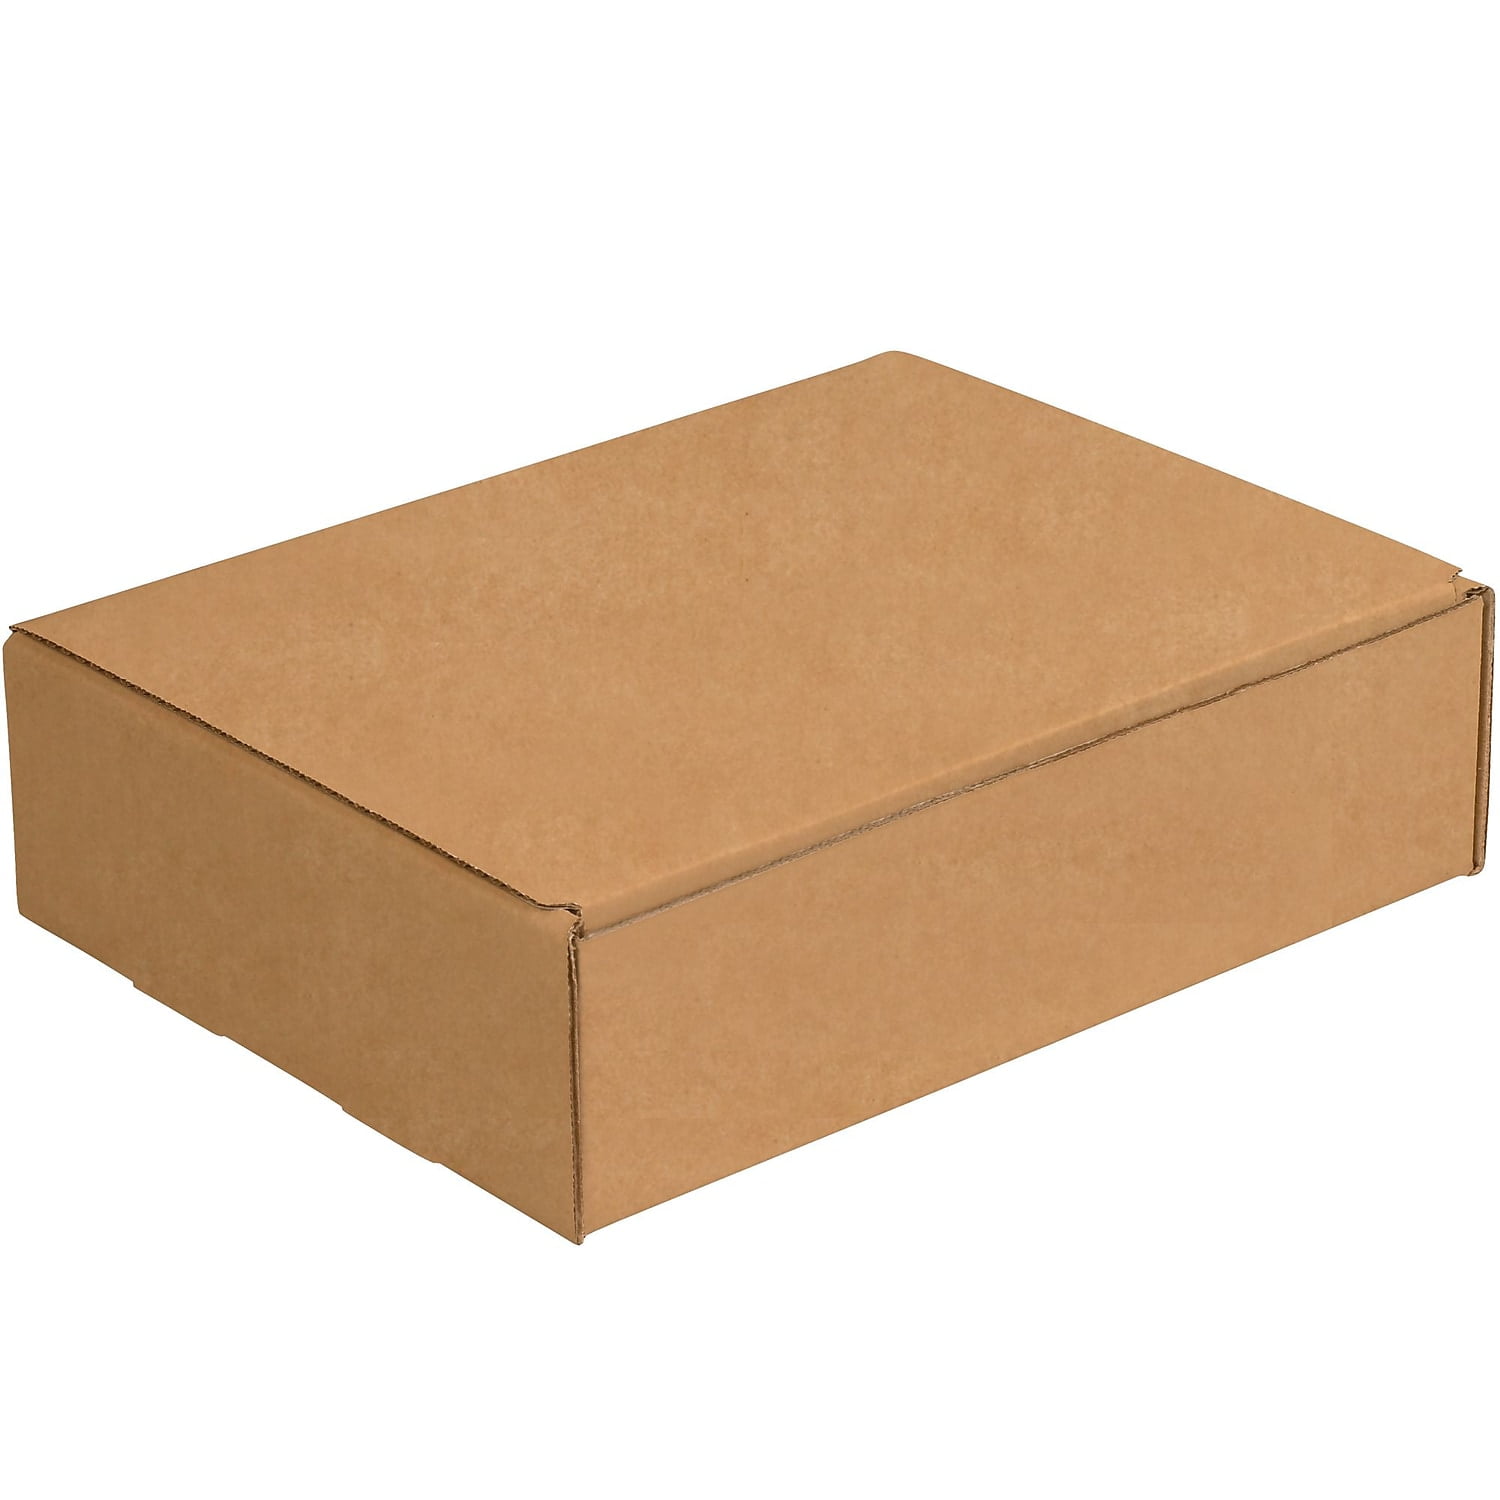 11 1/8 x 8 3/4 x 6" Corrugated Shipping Mailers from The Boxery 50/pk 